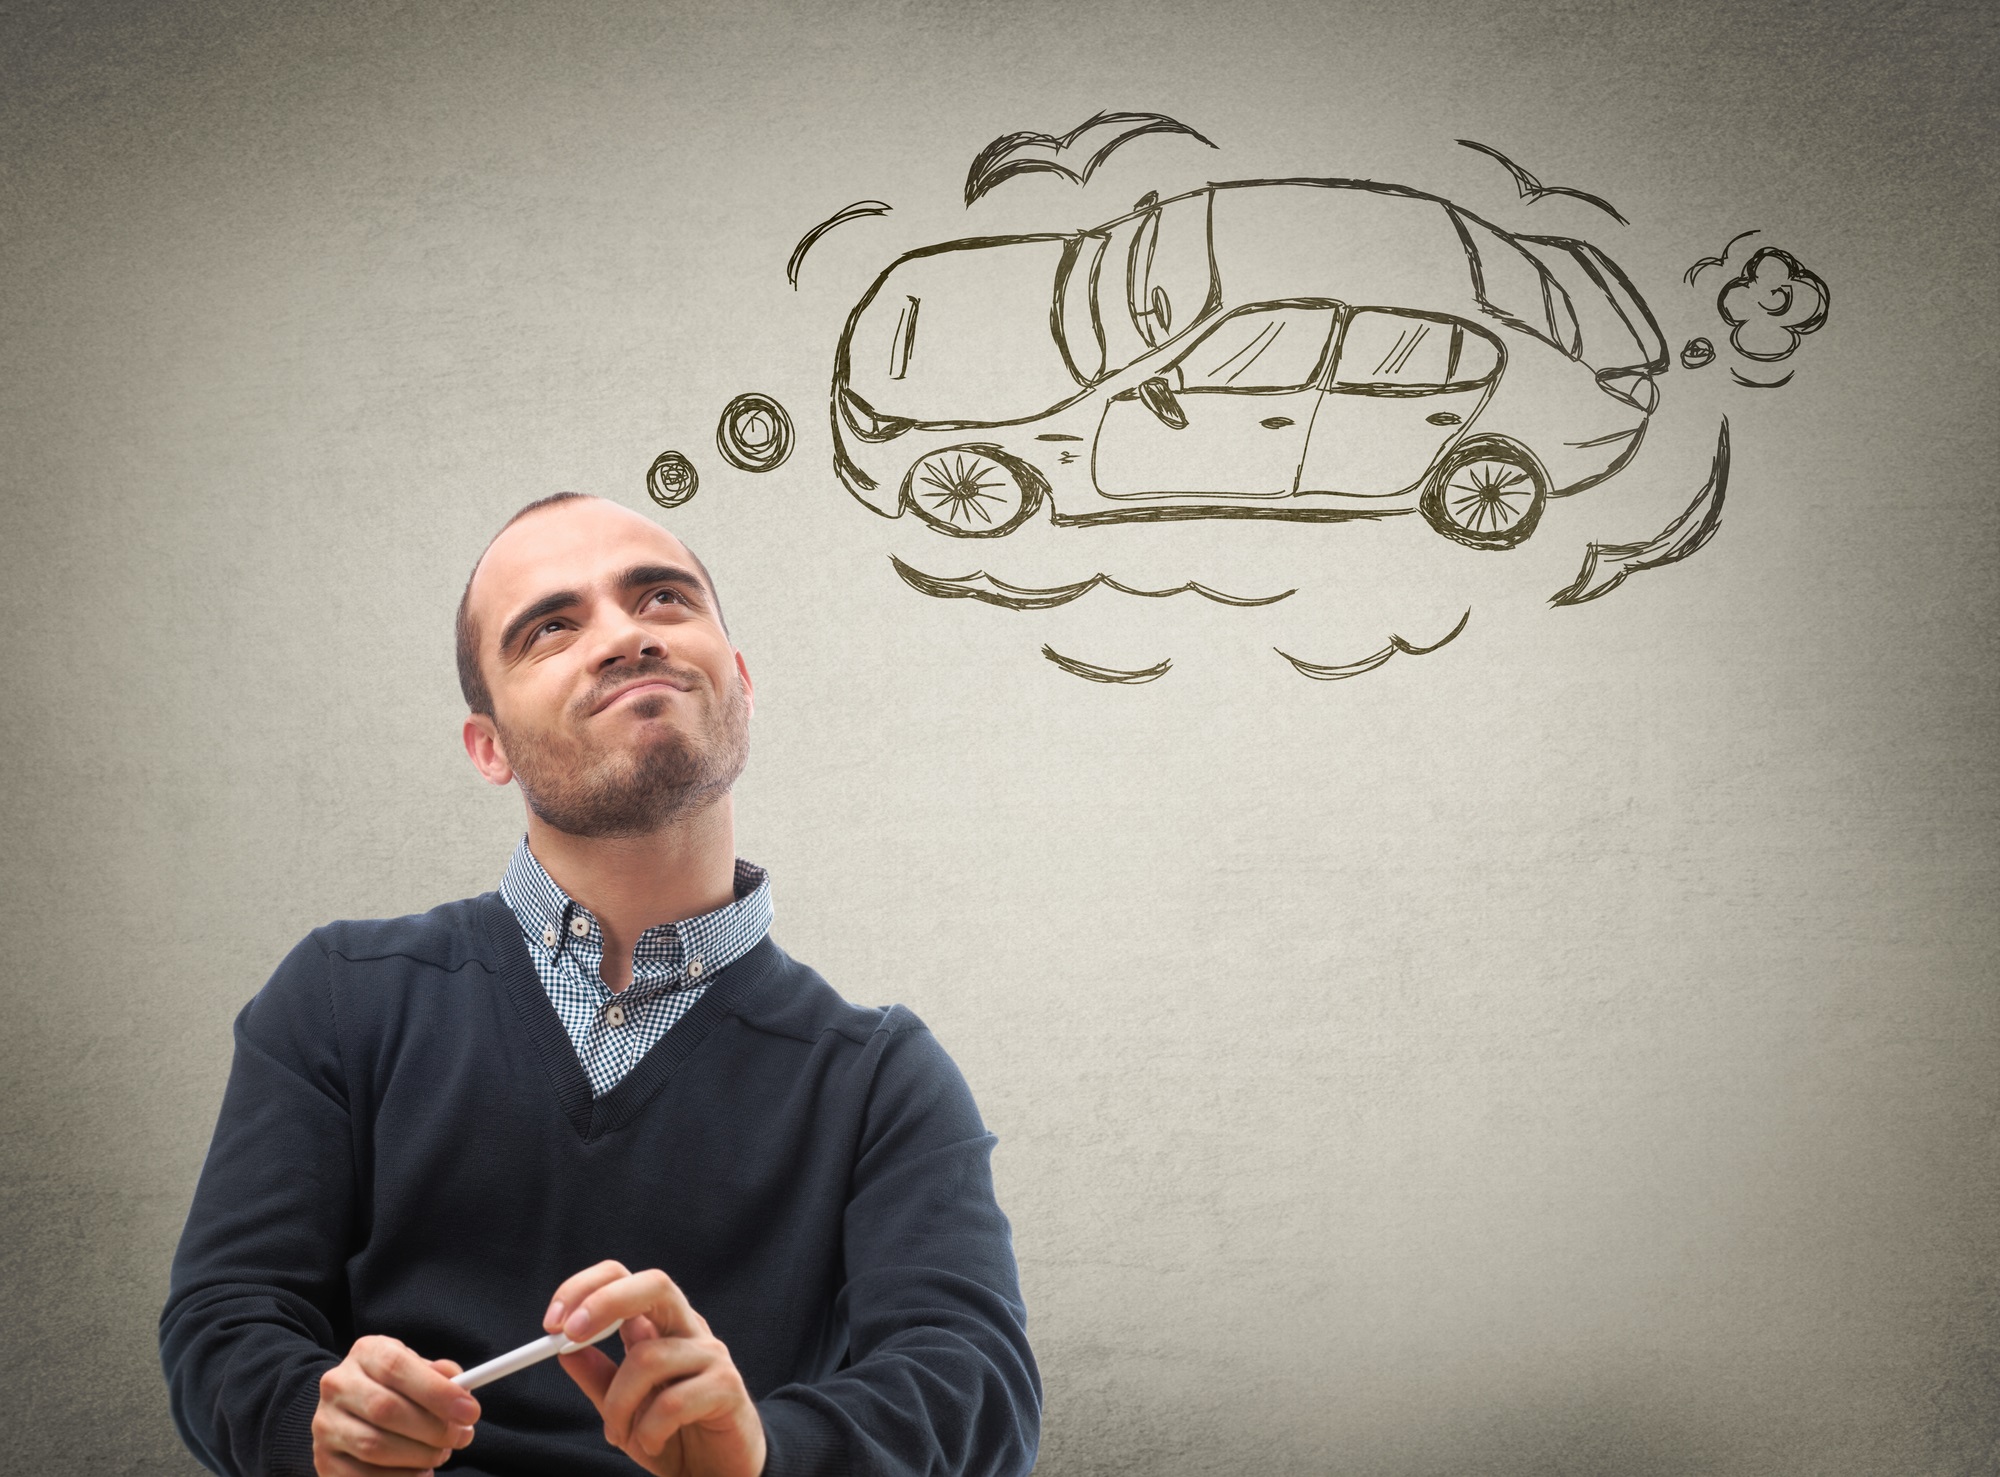 12 Important Things To Look For When Leasing A Car